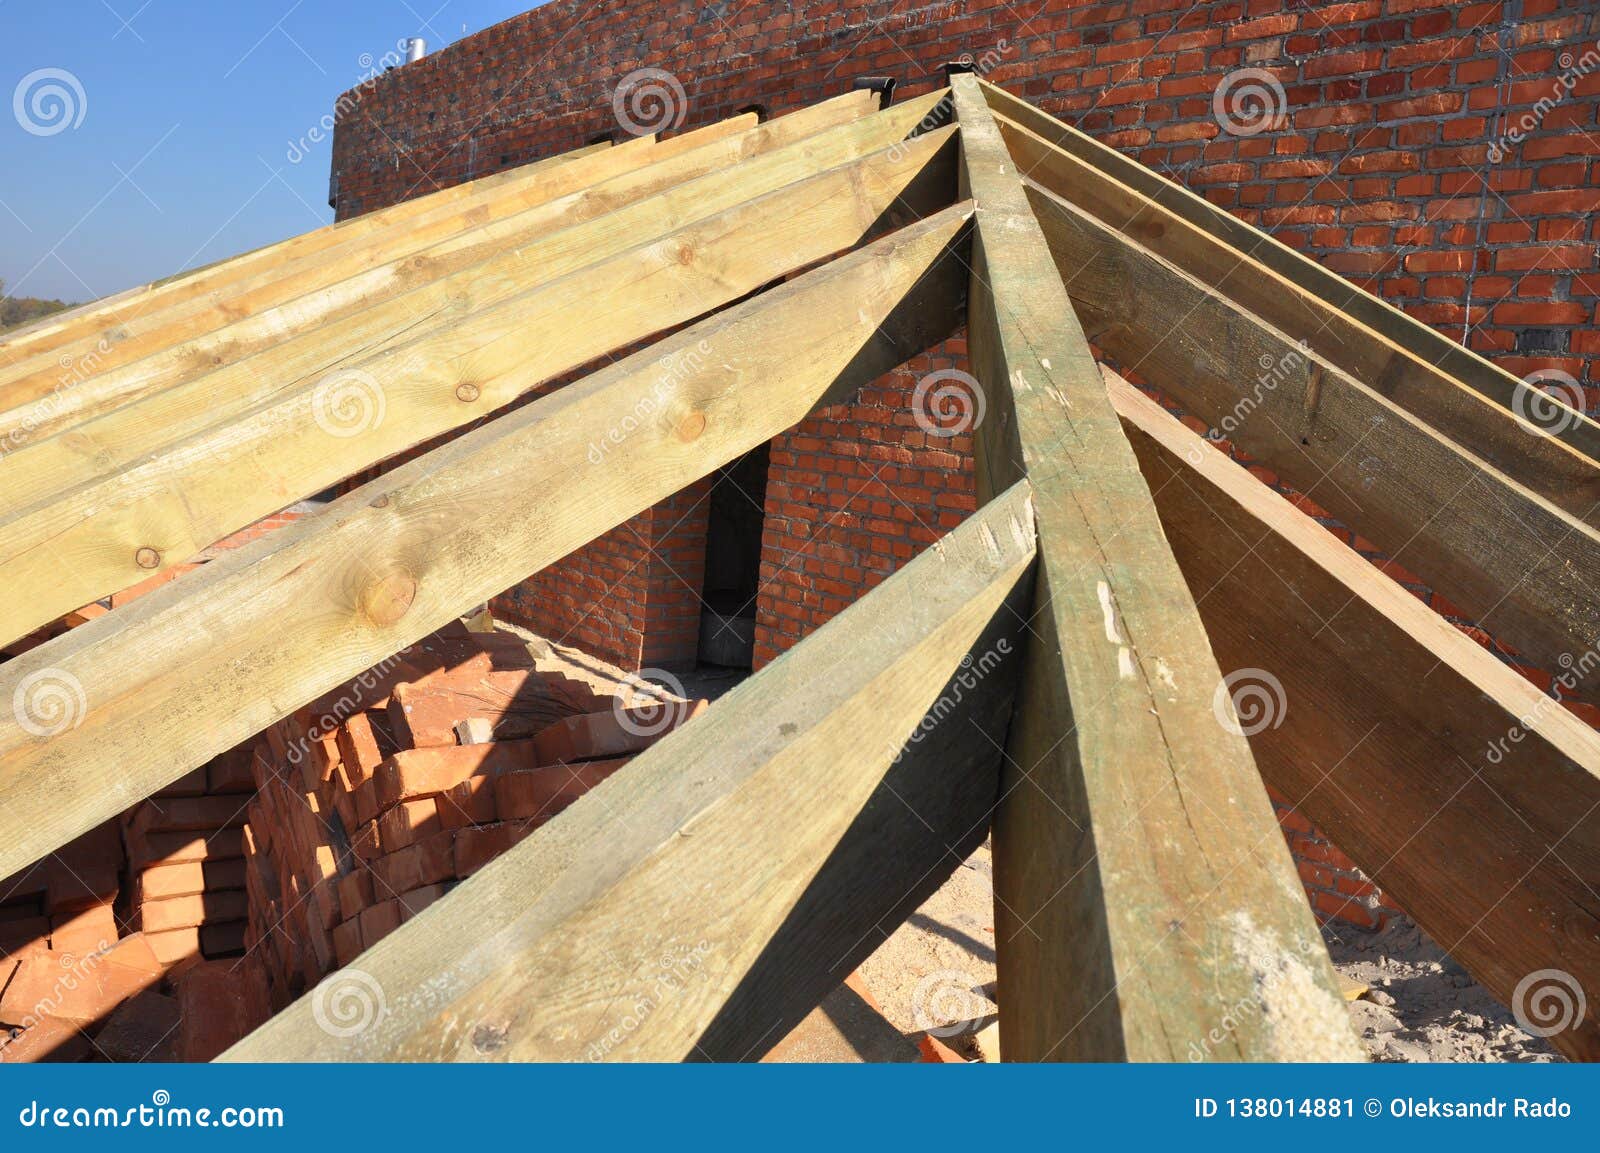 Roofing Construction With Trusses, Wooden Rafters, Eaves And Timber On Brick House Roof Corner